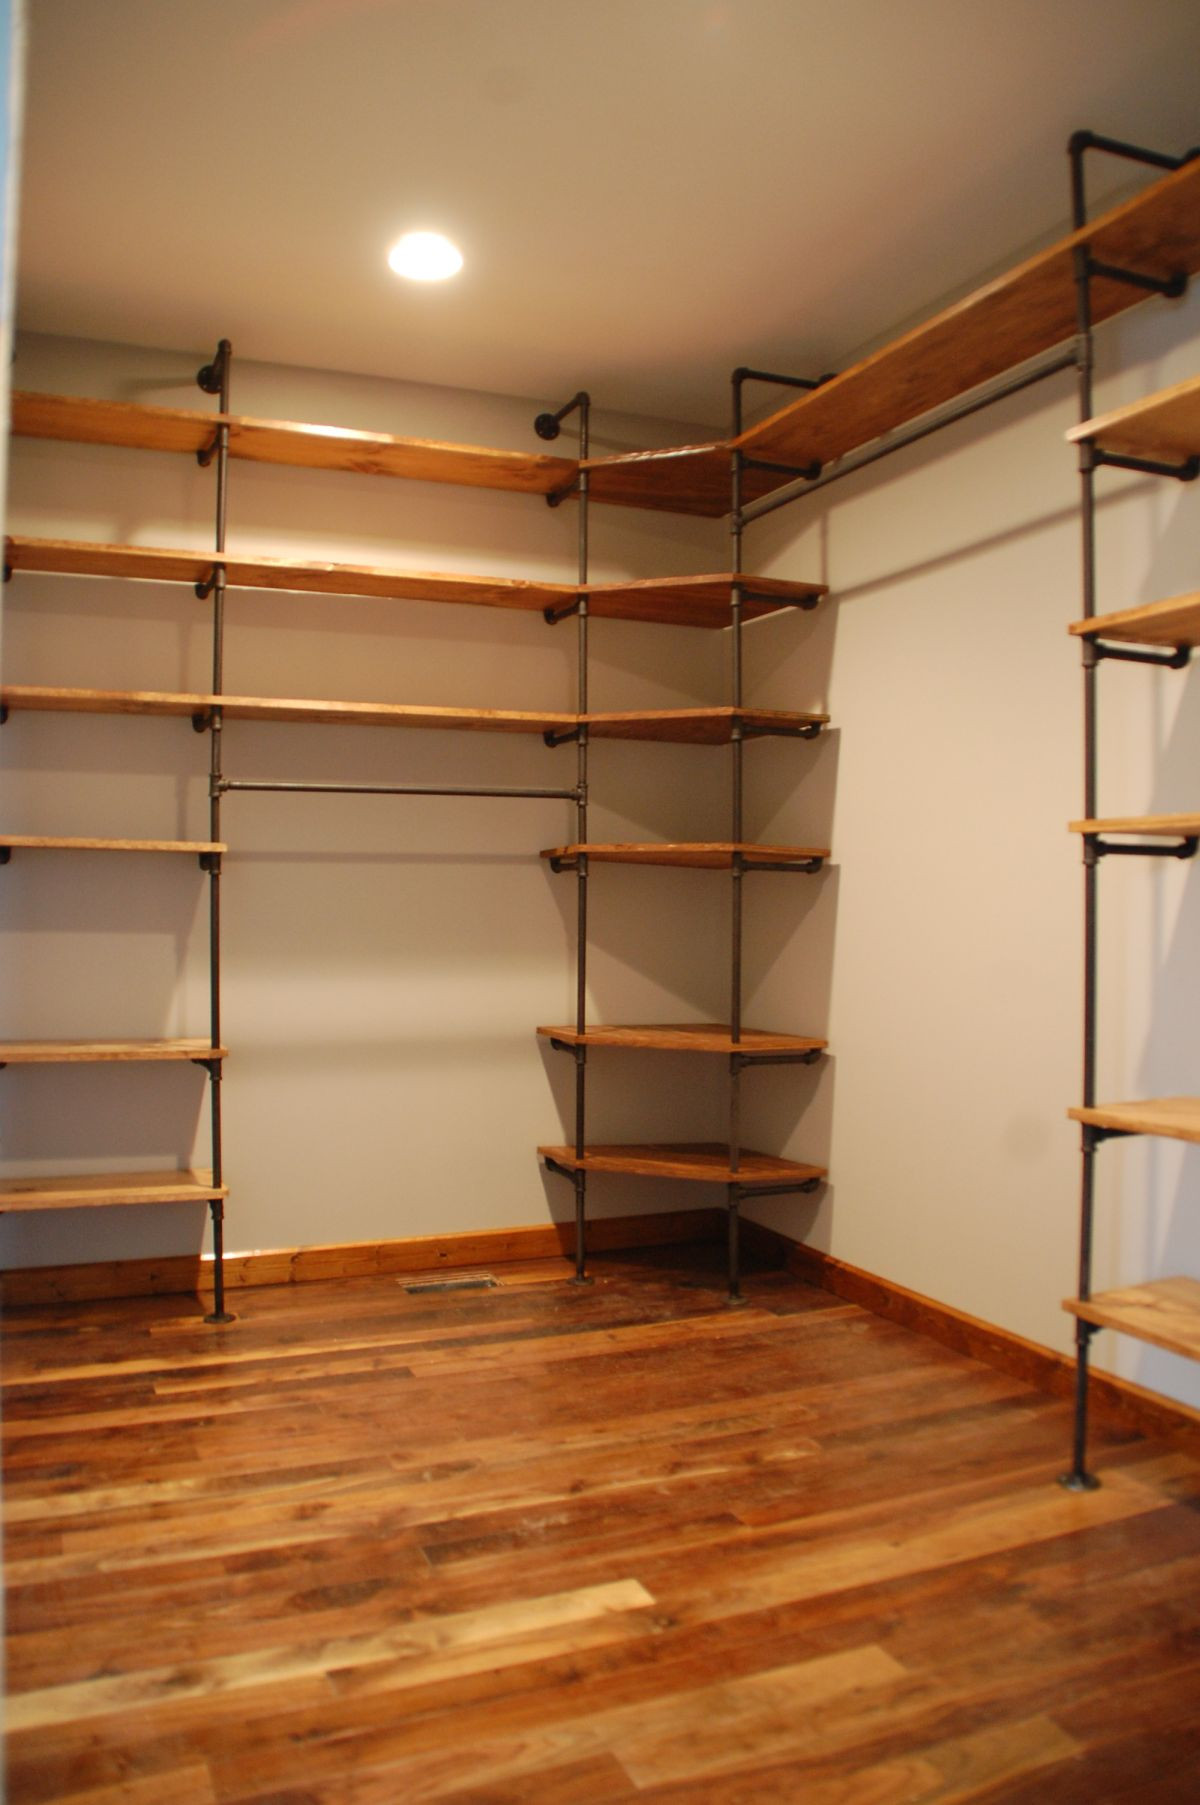 DIY Walk In Closet Organizers
 How To Customize A Closet For Improved Storage Capacity